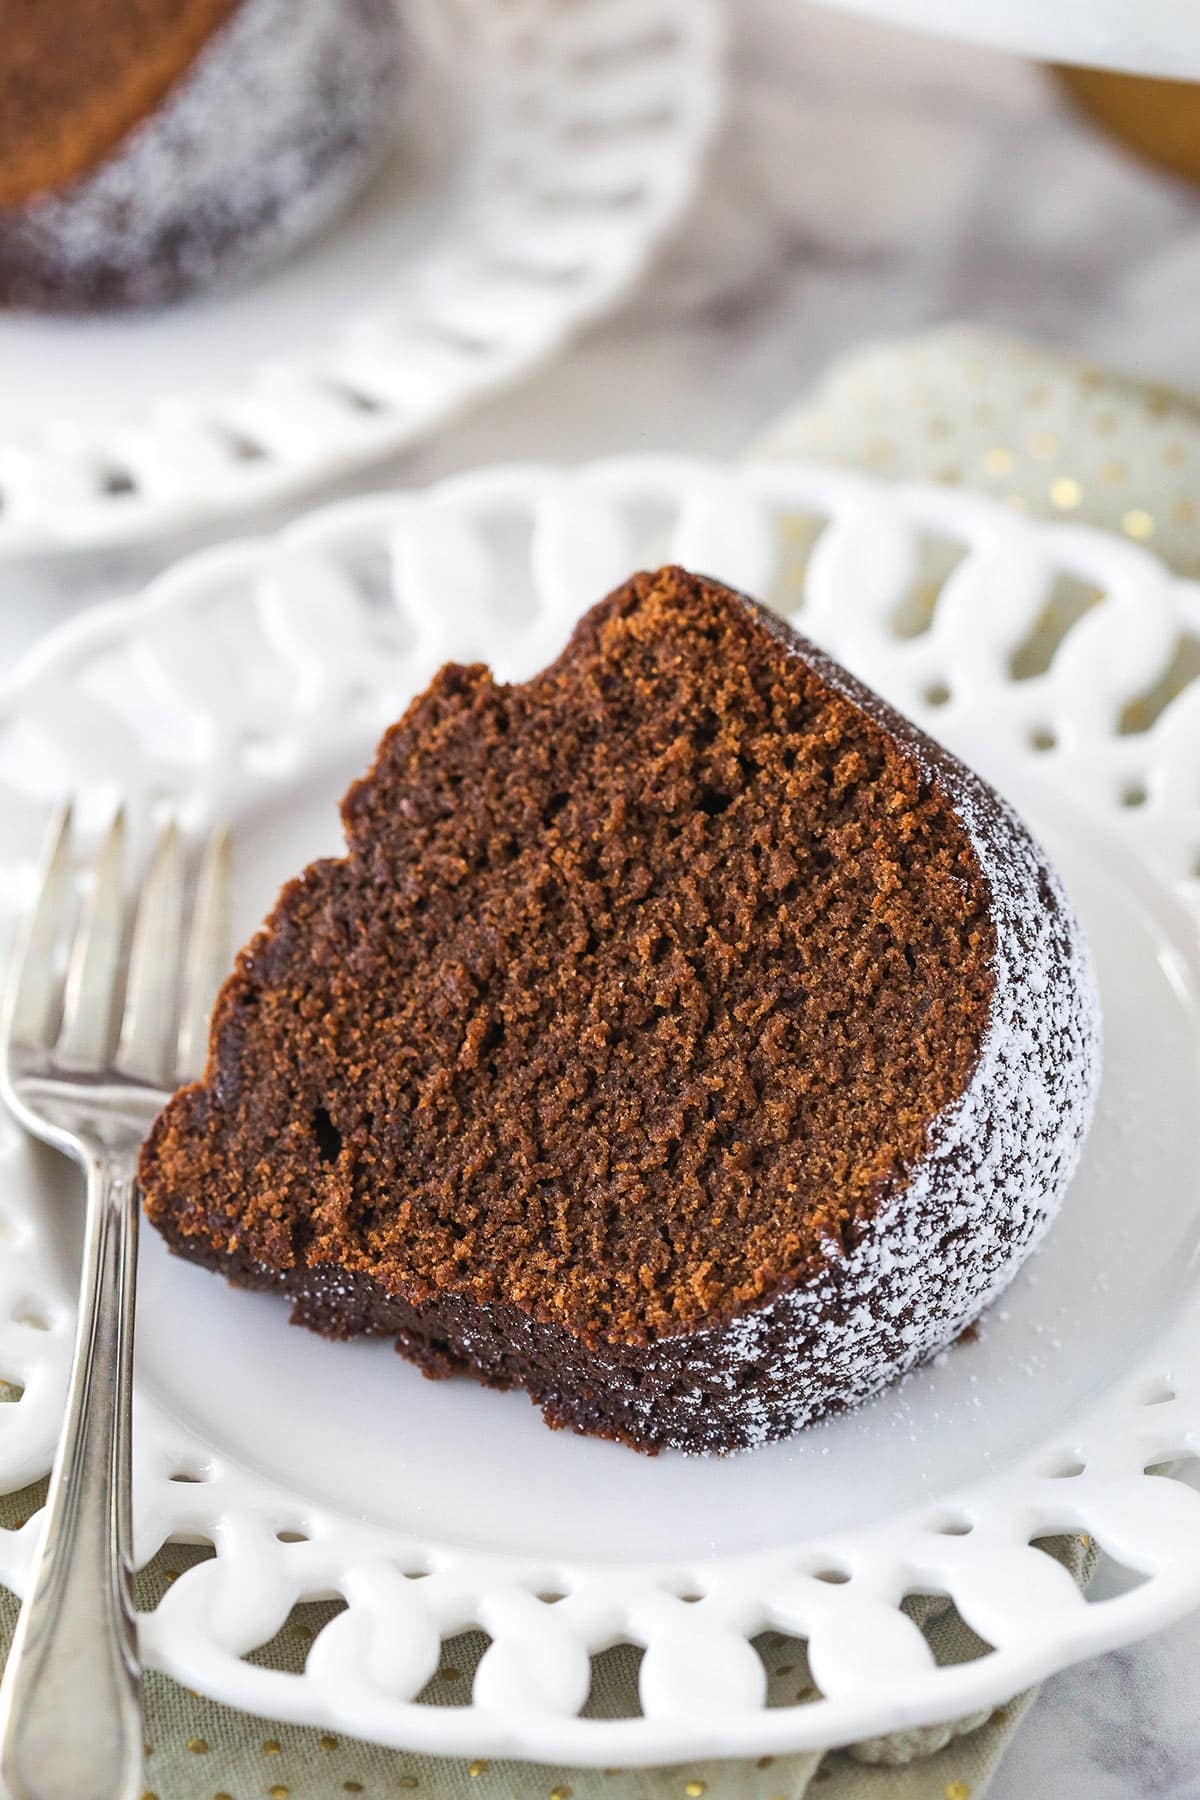 A slice of chocolate pound cake on a plate with a fork.